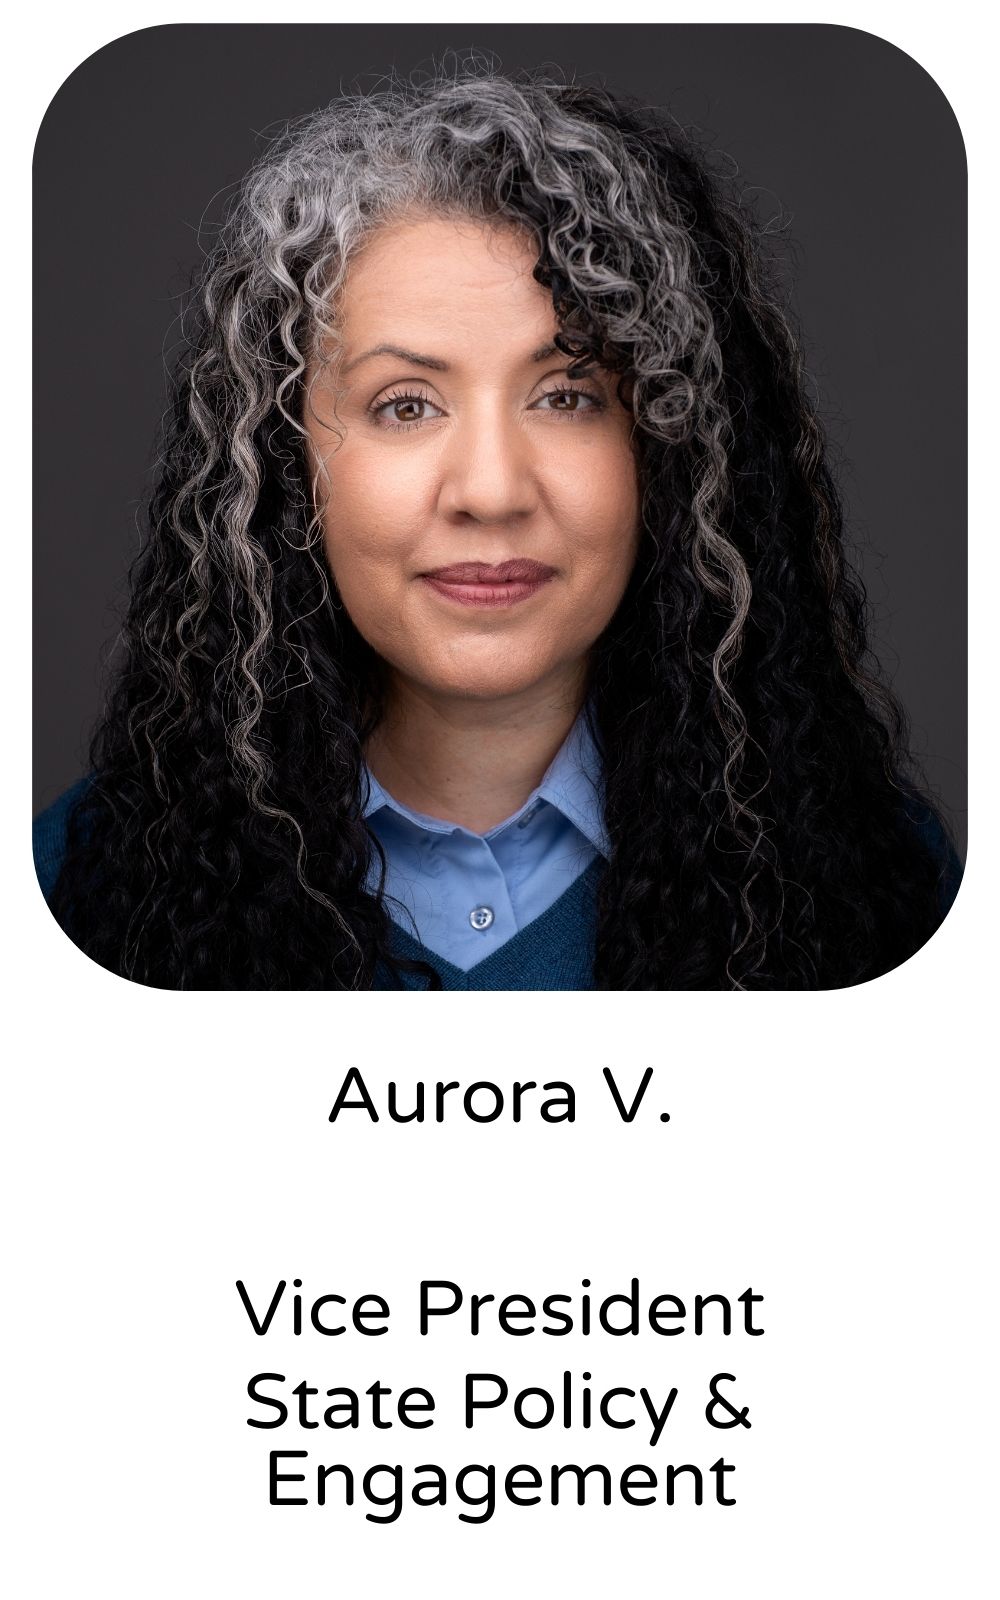 Aurora V, Vice President, State Policy & Engagement